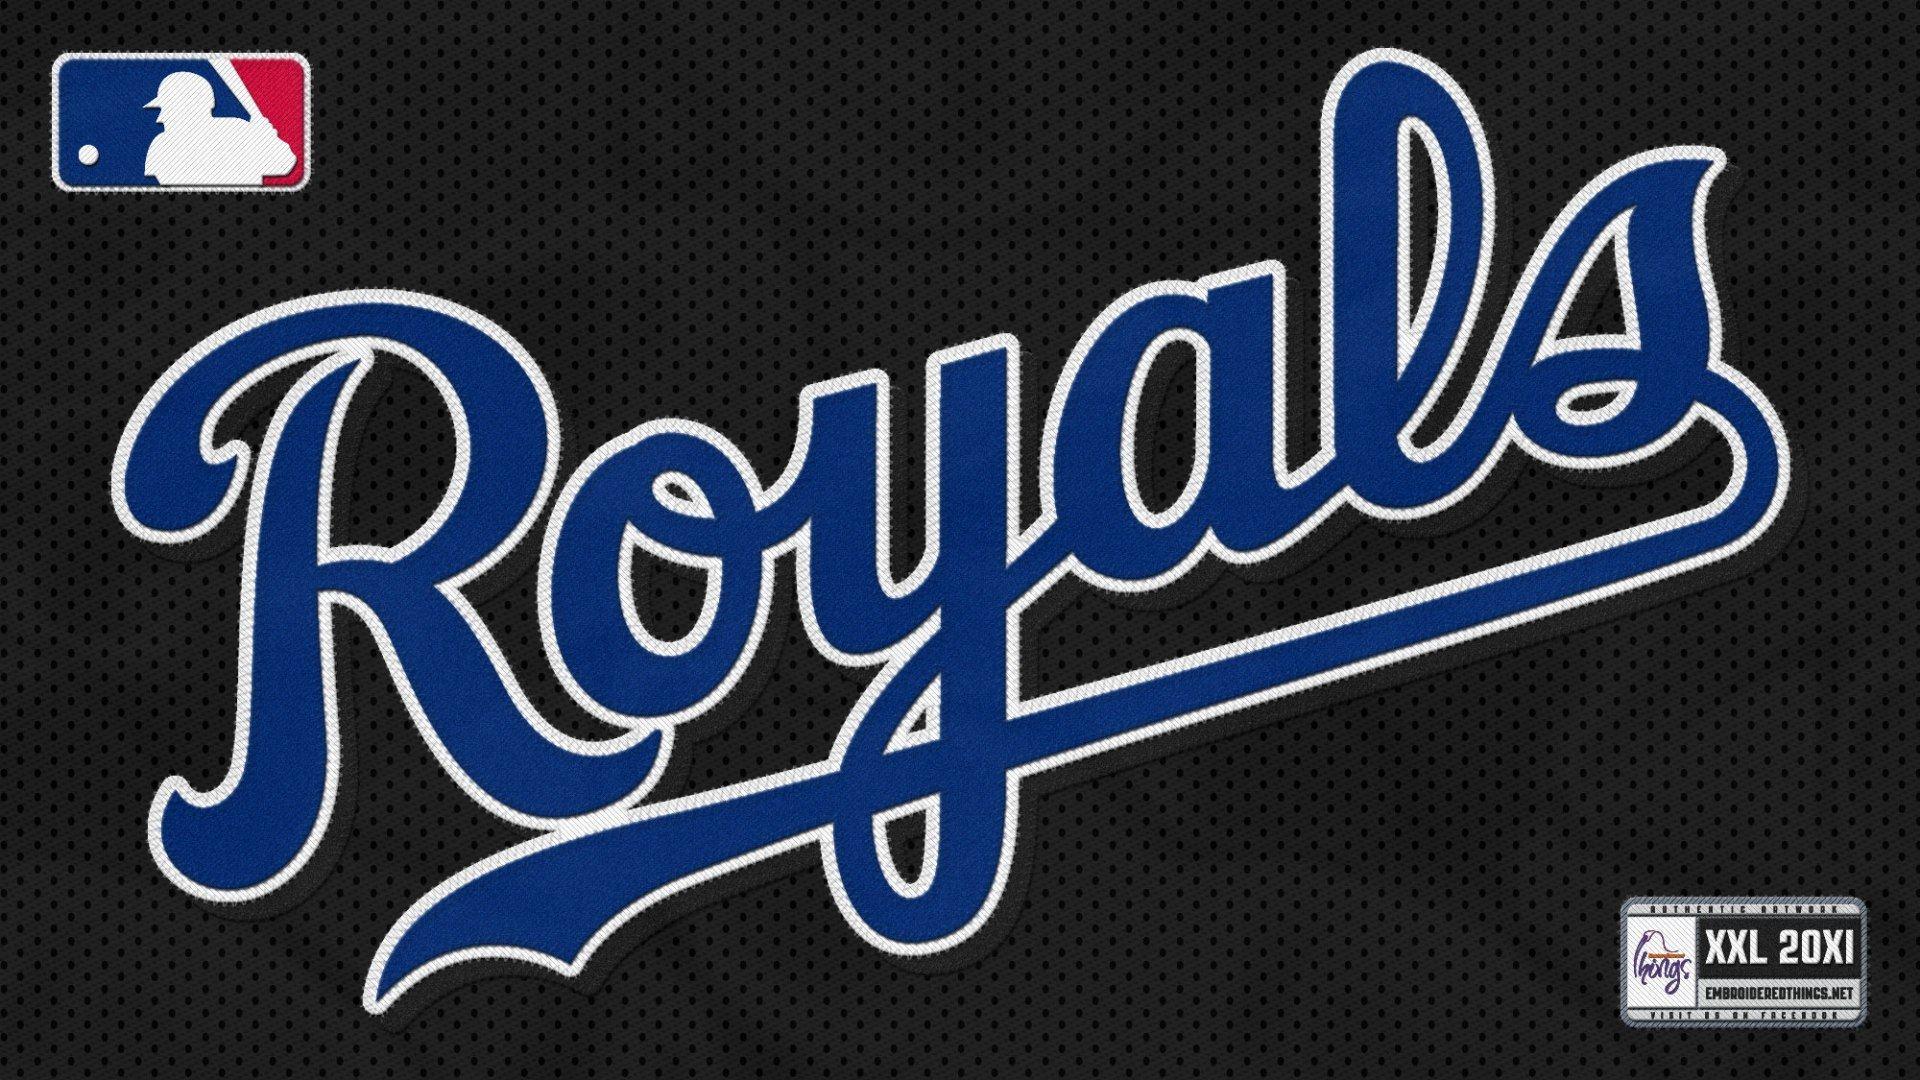 Kansas City Royals Wallpaper Picture, High Quality 05 2018